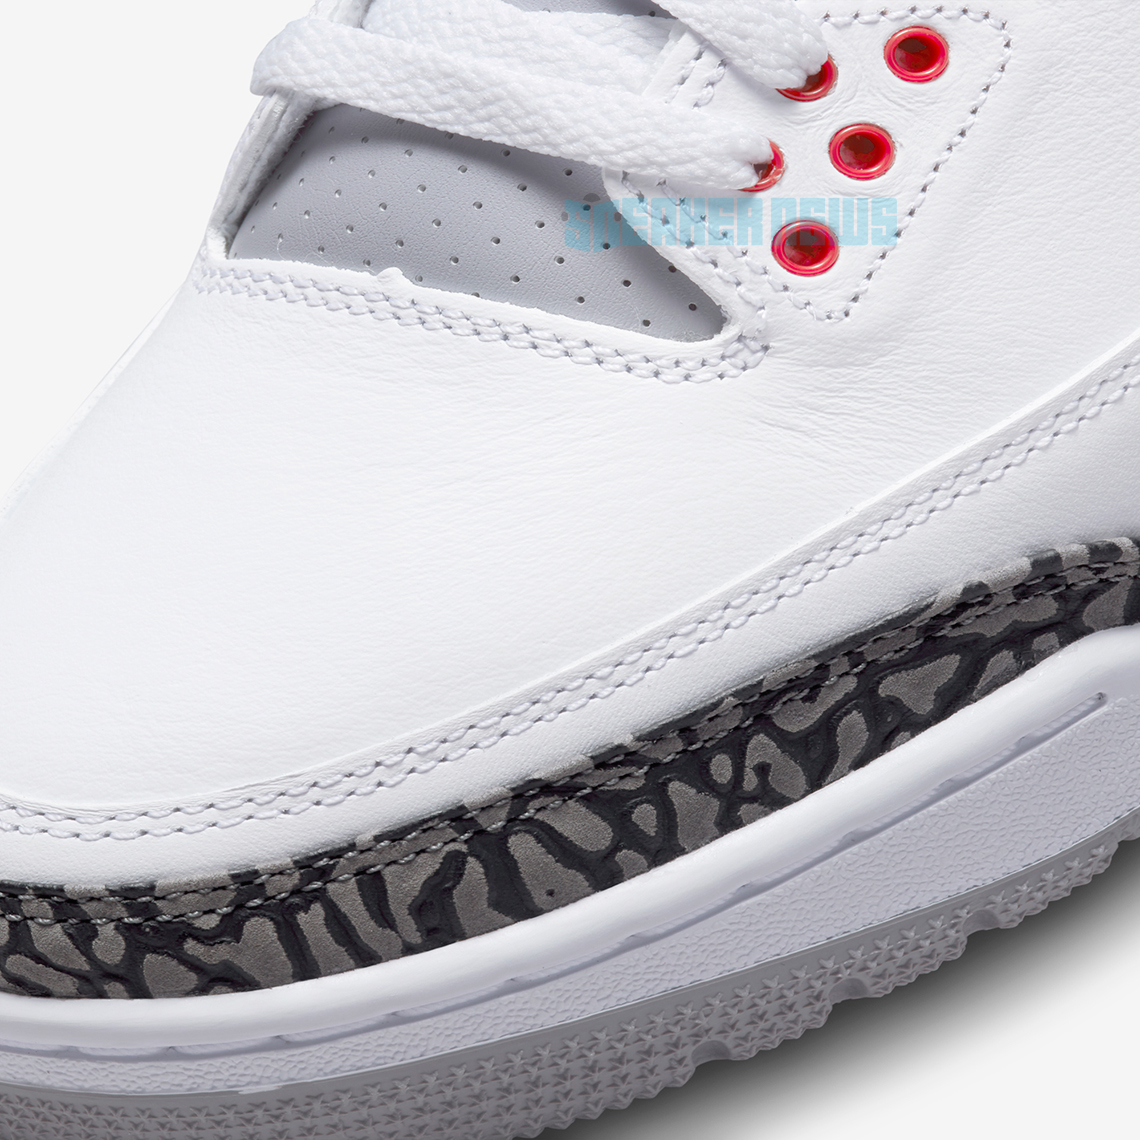 Official Images Of The Air Jordan 3 “Fire Red” | LaptrinhX / News